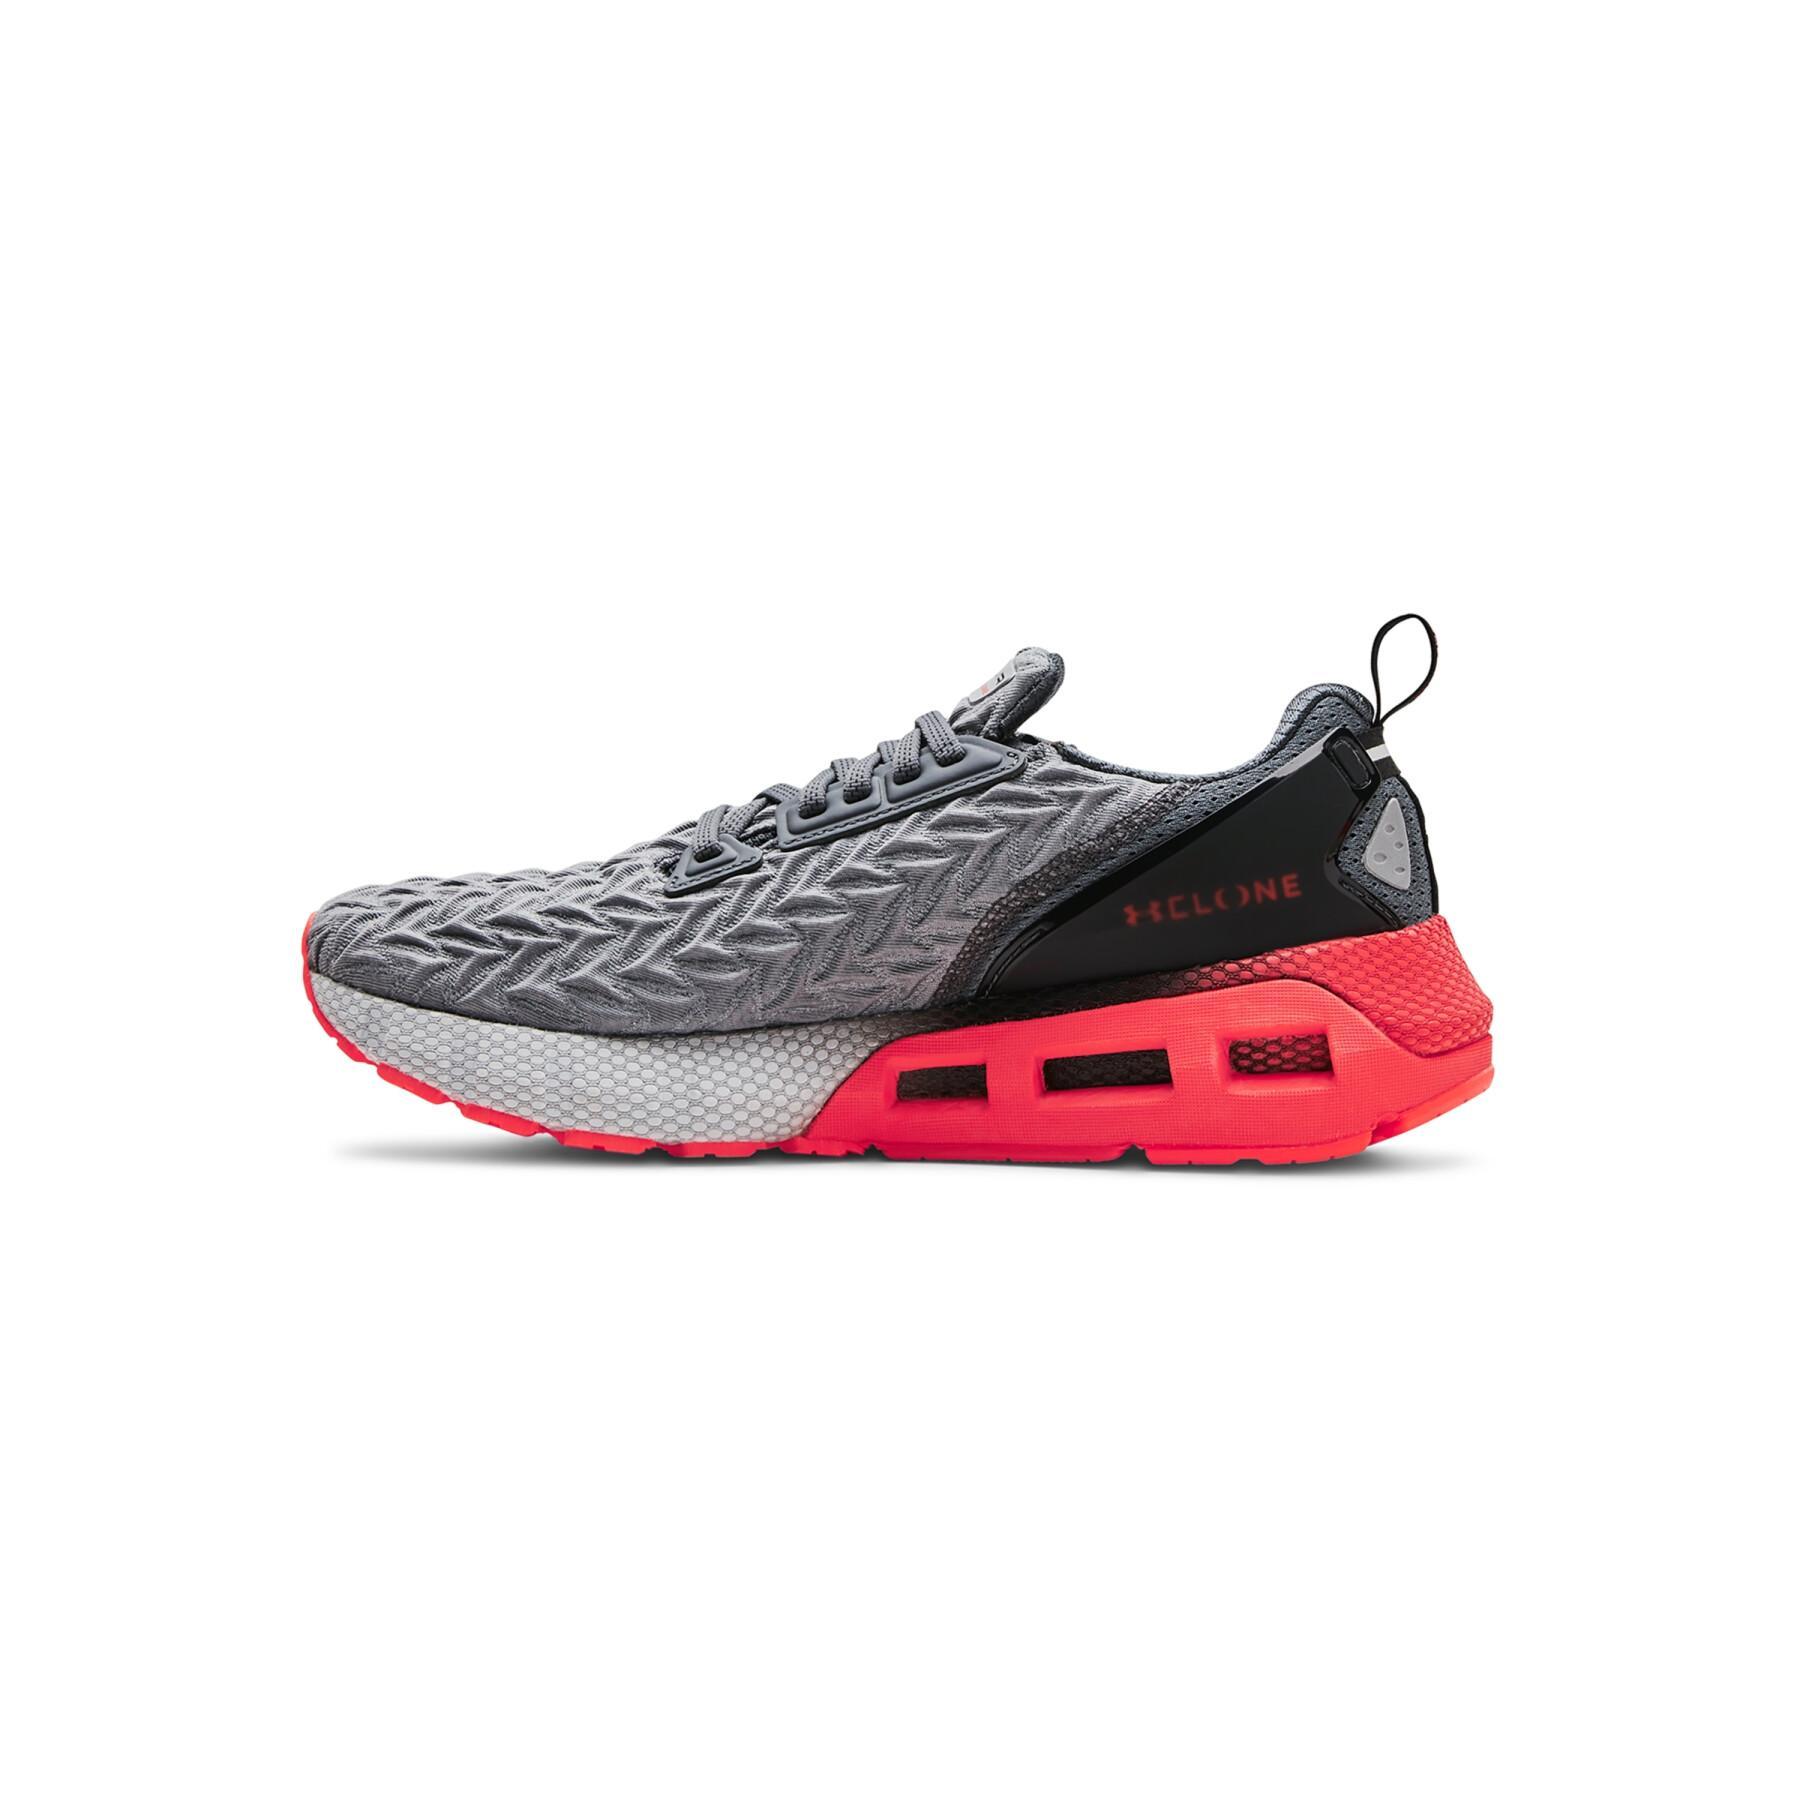 Running shoes Under Armour Hovr™ mega 2 clone